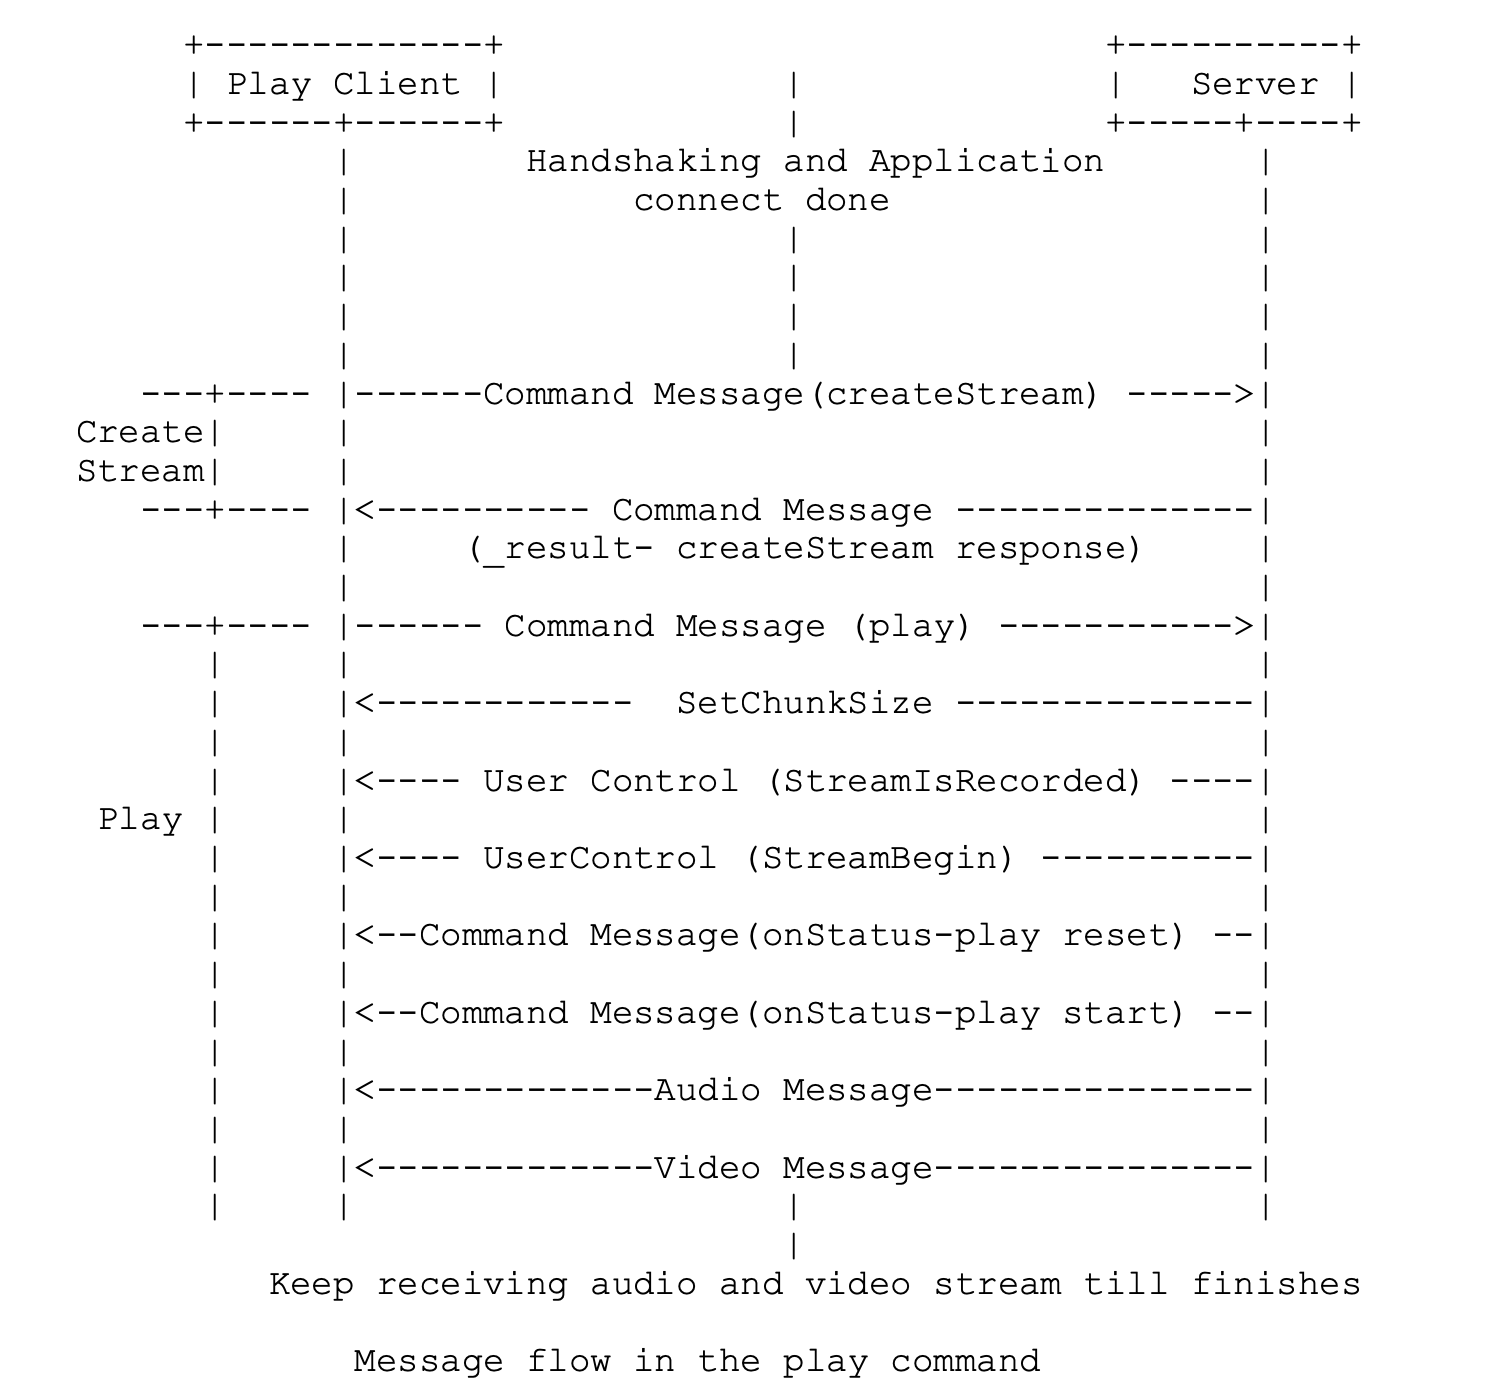 Message flow in the play command